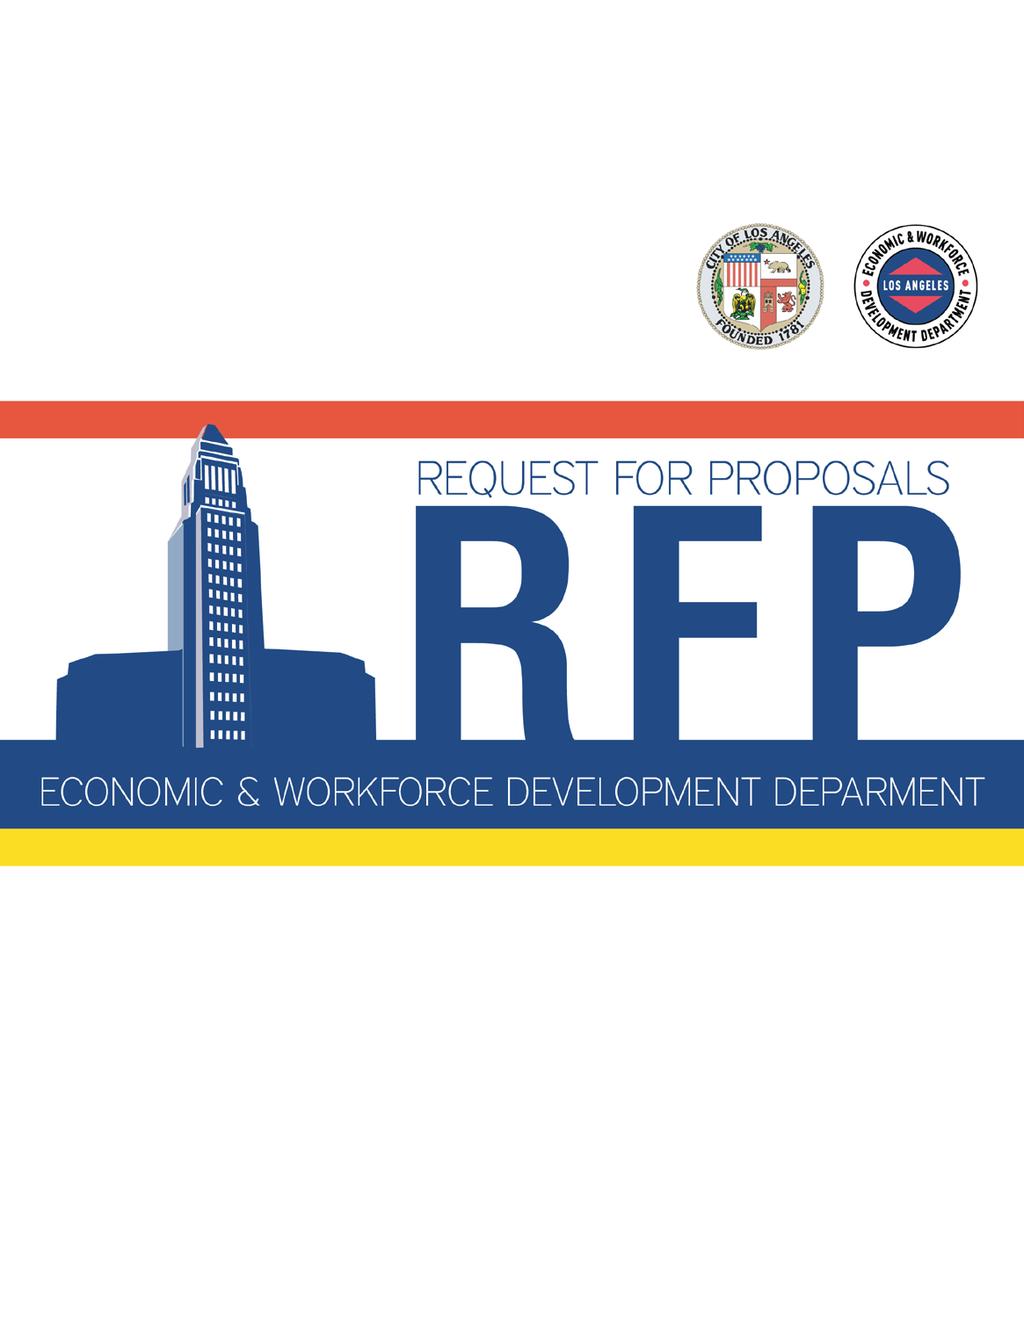 CITY OF LOS ANGELES BETHUNE OPPORTUNITY SITE 05/18/2017 The City of Los Angeles Economic and Workforce Development Department is seeking proposals for the development of